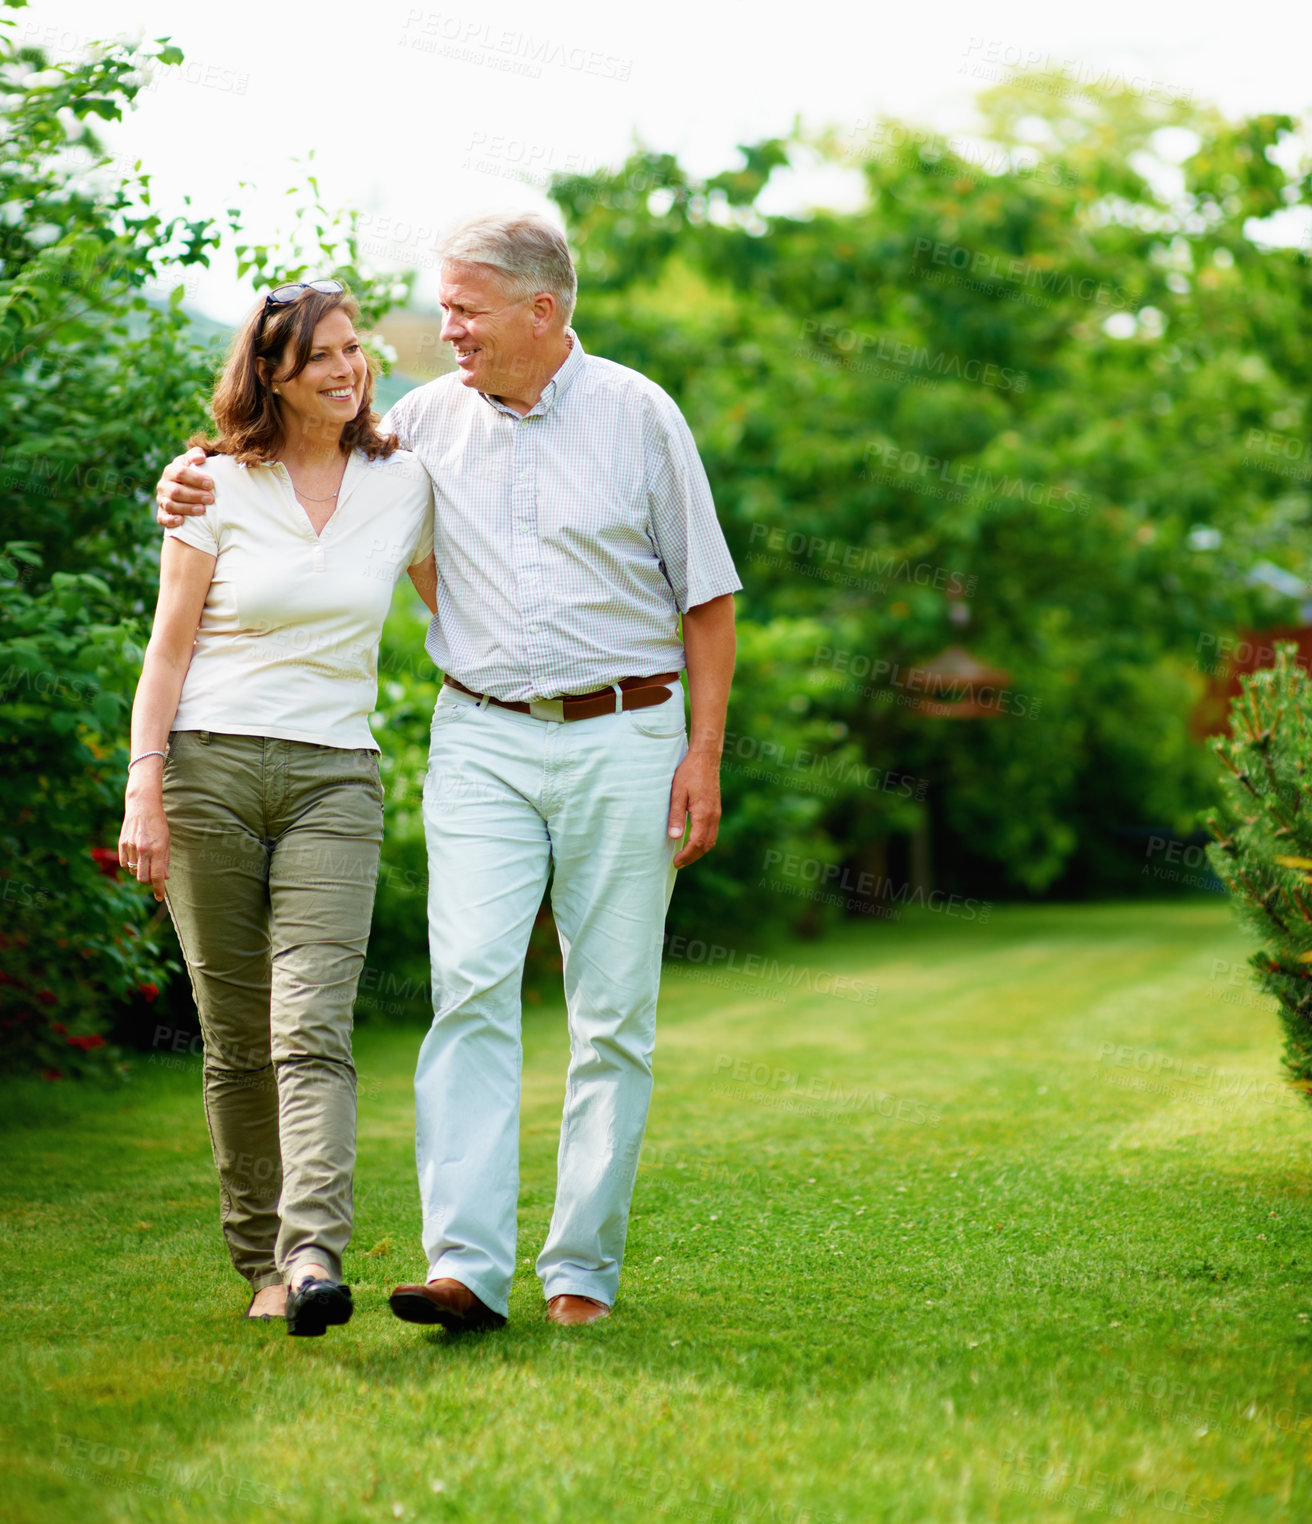 Buy stock photo Mature, garden or happy couple hug in park or nature on a outdoor romantic walk for support. Wellness, freedom or senior man with woman bonding, care or enjoying date or retirement together outside